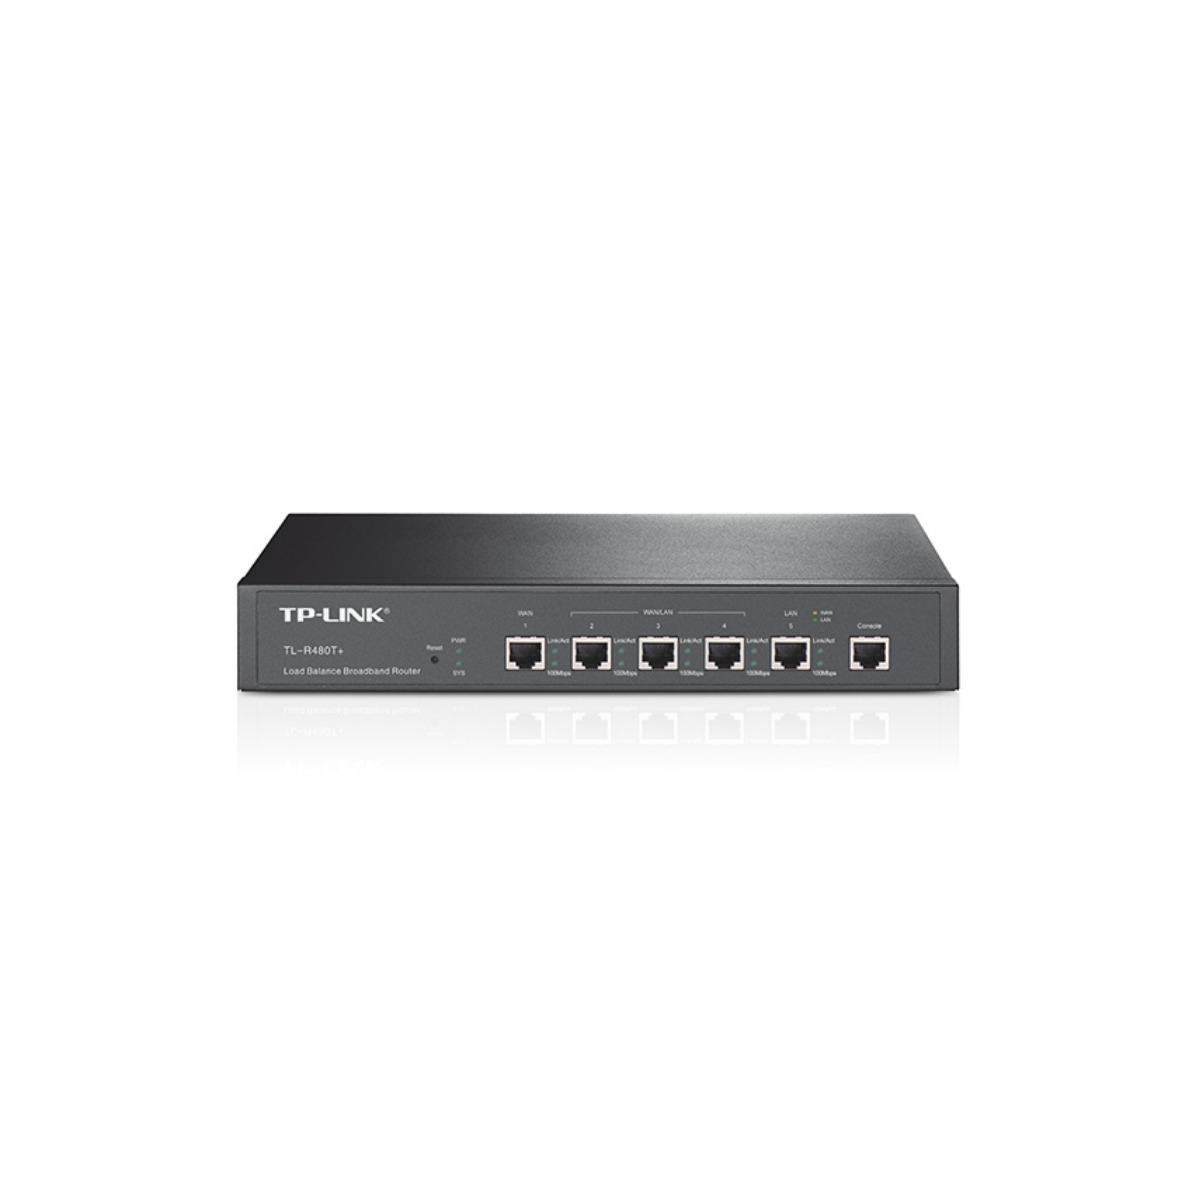 TP-Link 2 - Switch Router TP-LINK TL-R480T+ - 3-Port-Switch TL-R480T+ - 5 WAN-Ports: